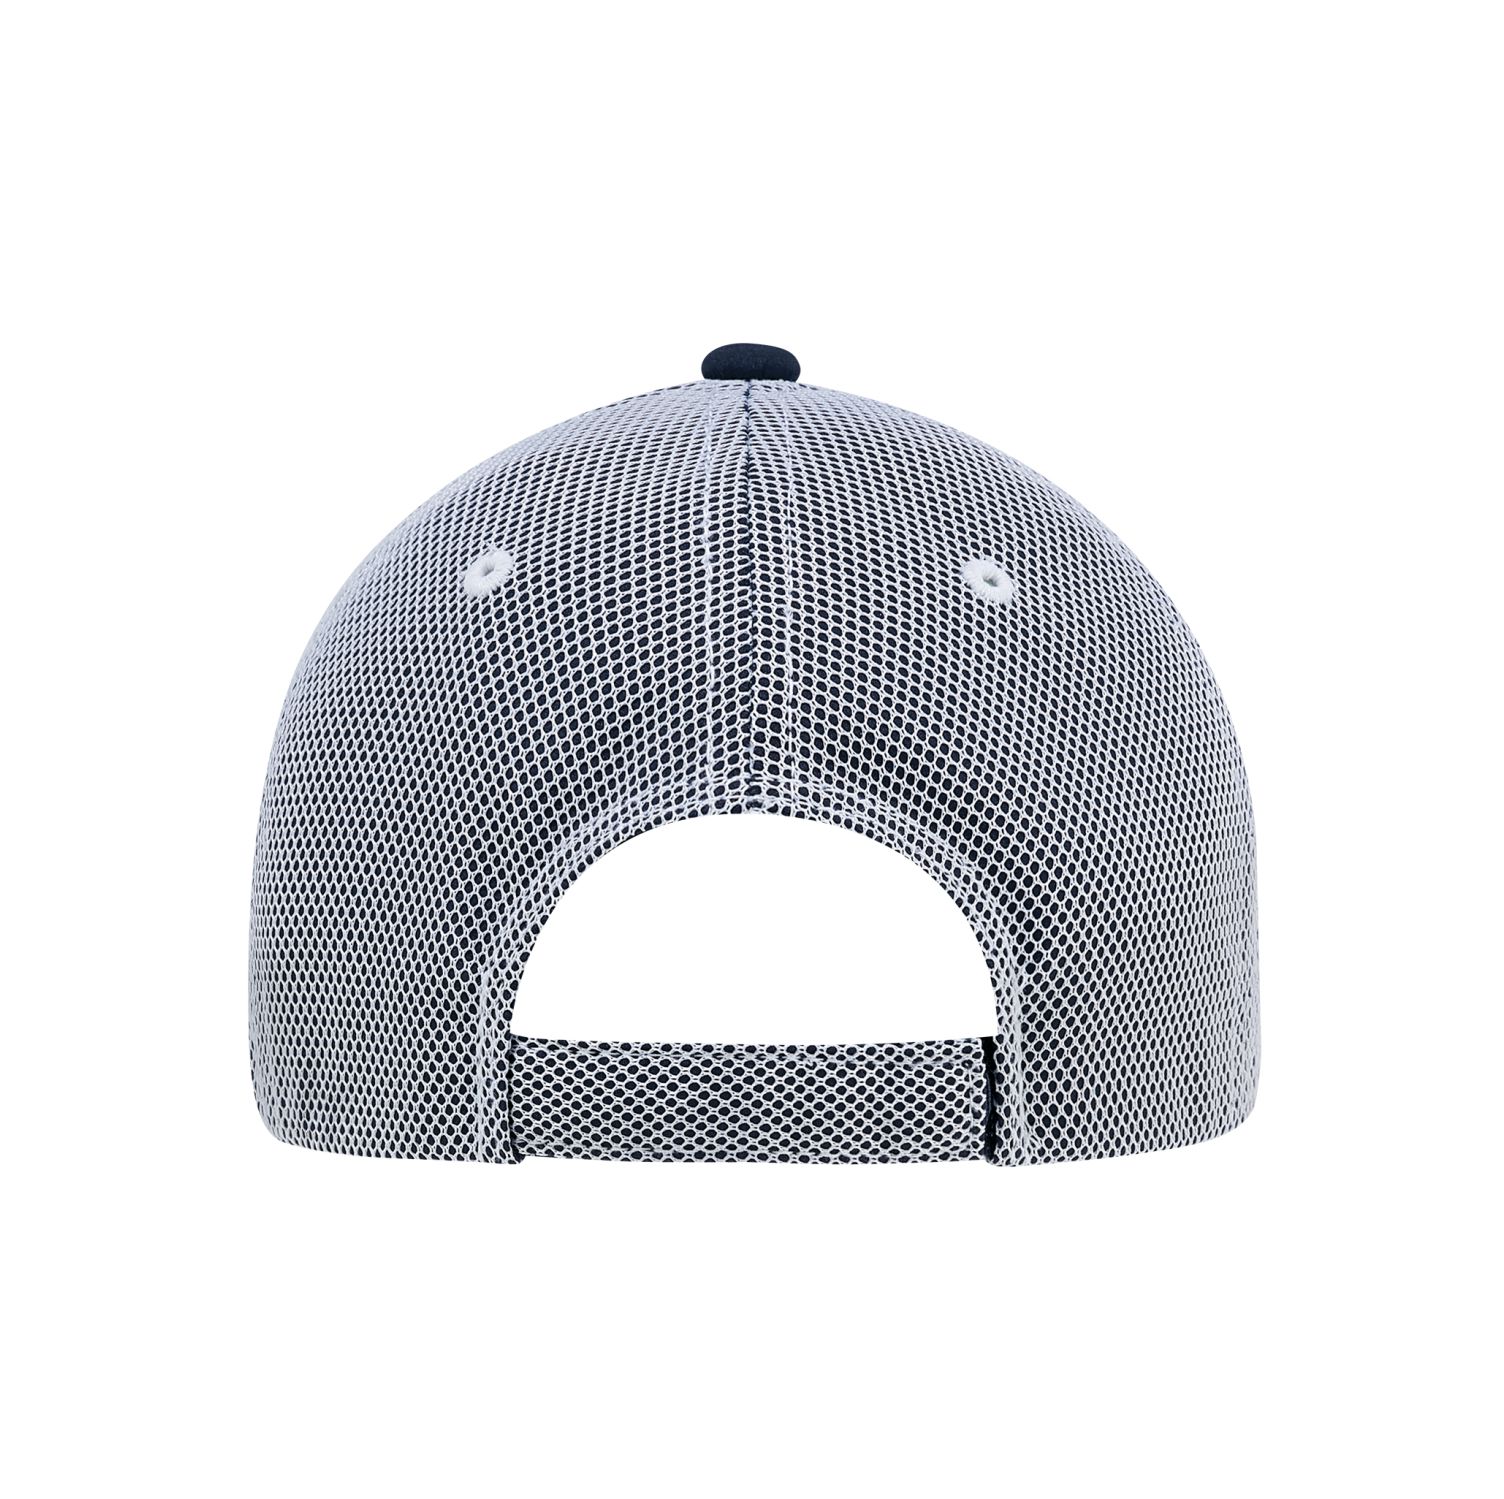 AJM Polyester Rip Stop / Polyester Rip Stop Bonded Mesh 6 Panel Constructed Full-Fit Hat #1B637M Black / White Back